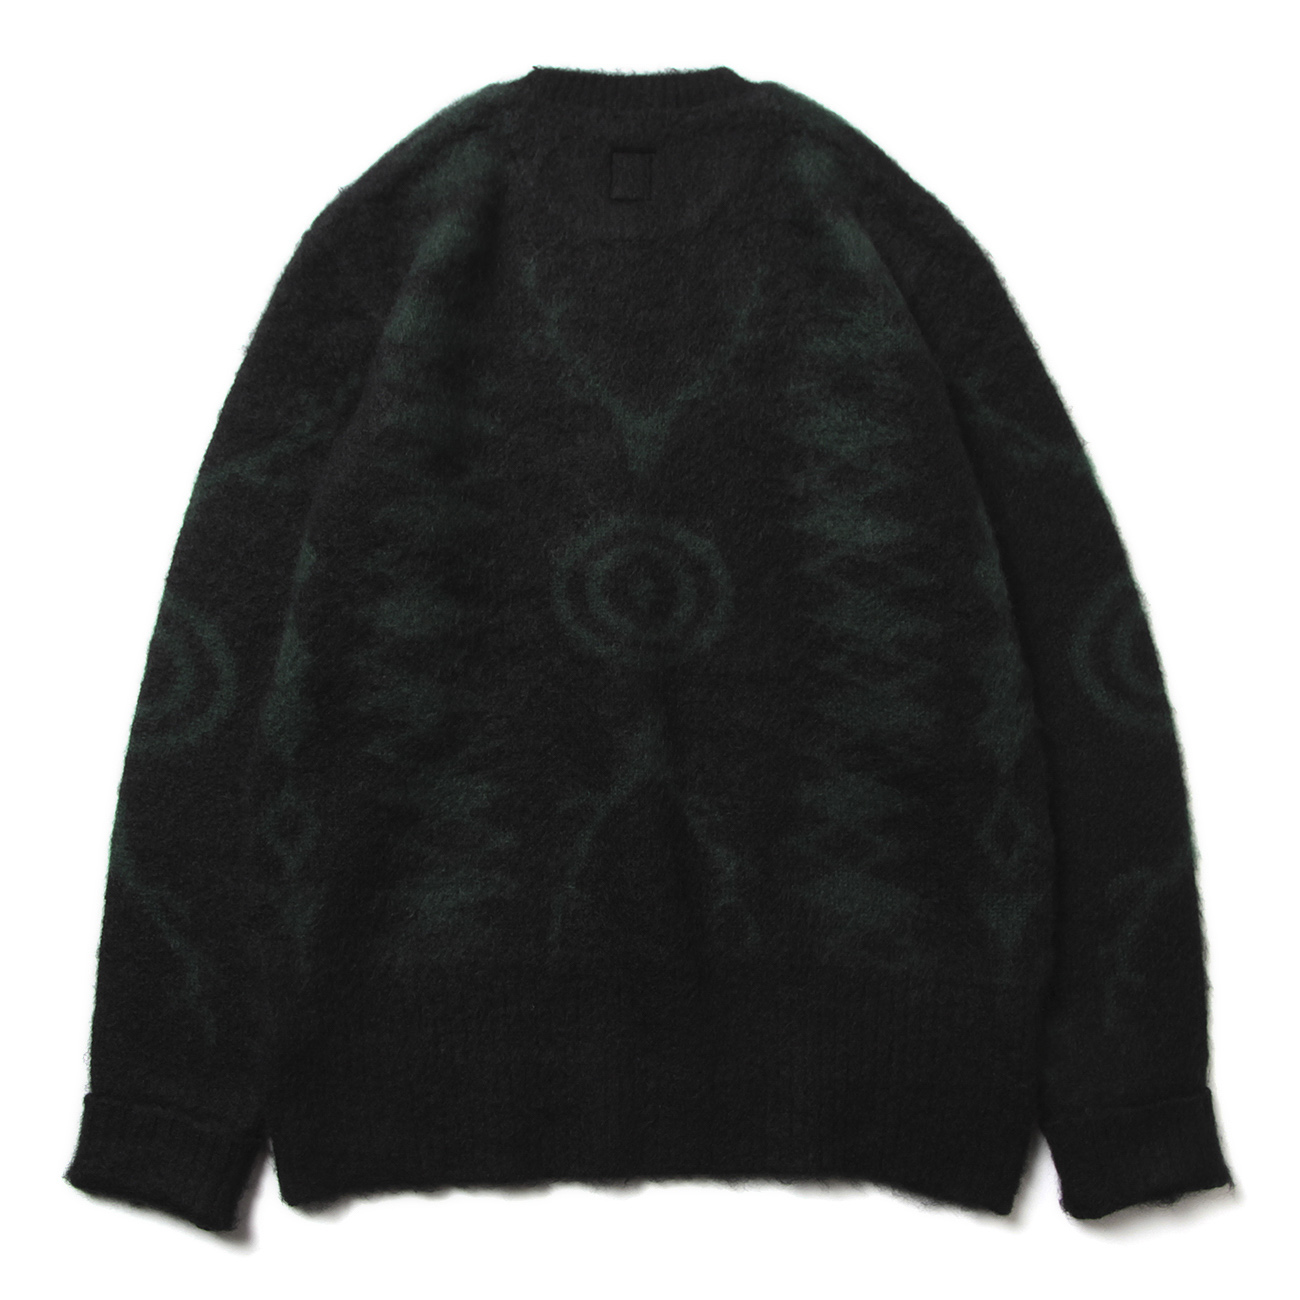 SOUTH2 WEST8 LOOSE FIT SWEATER BLACK 黒 S20FW - スウェット